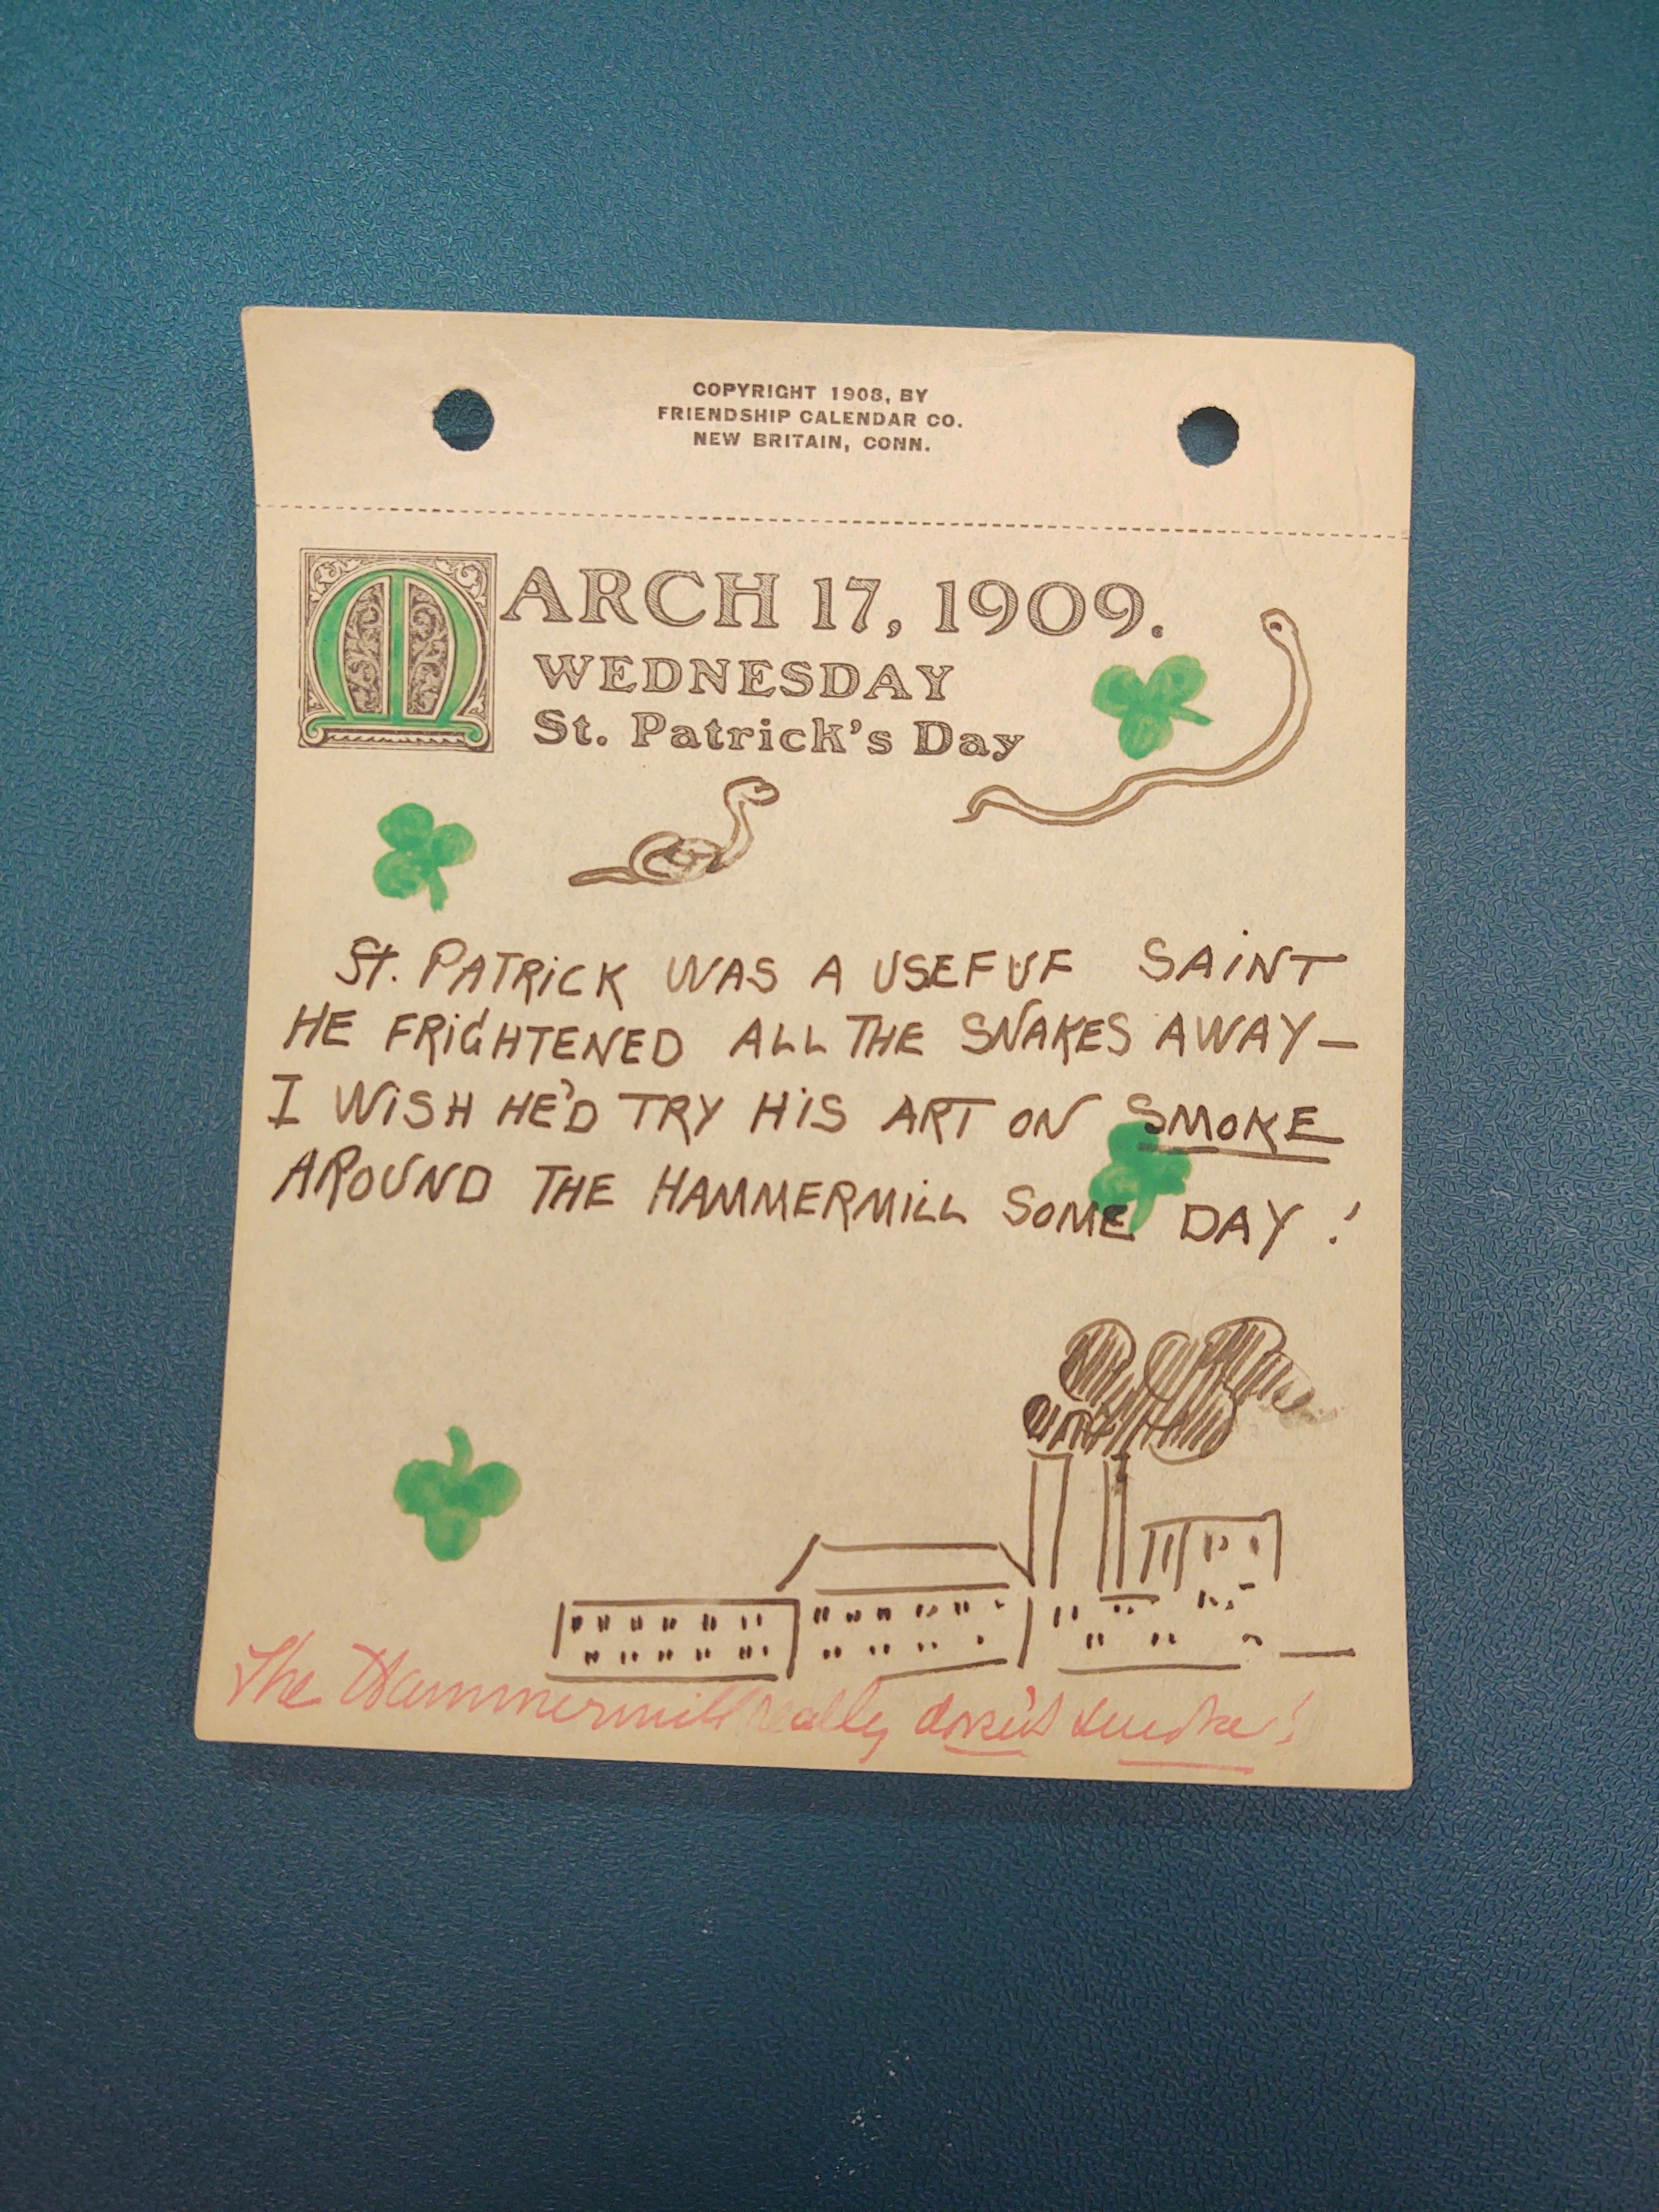 March 17, 1909. Wednesday: Green Shamrocks dispersed throughout the paper. Two snakes drawn on the top of the paper. A drawing of the hammermill center bottom right corner.